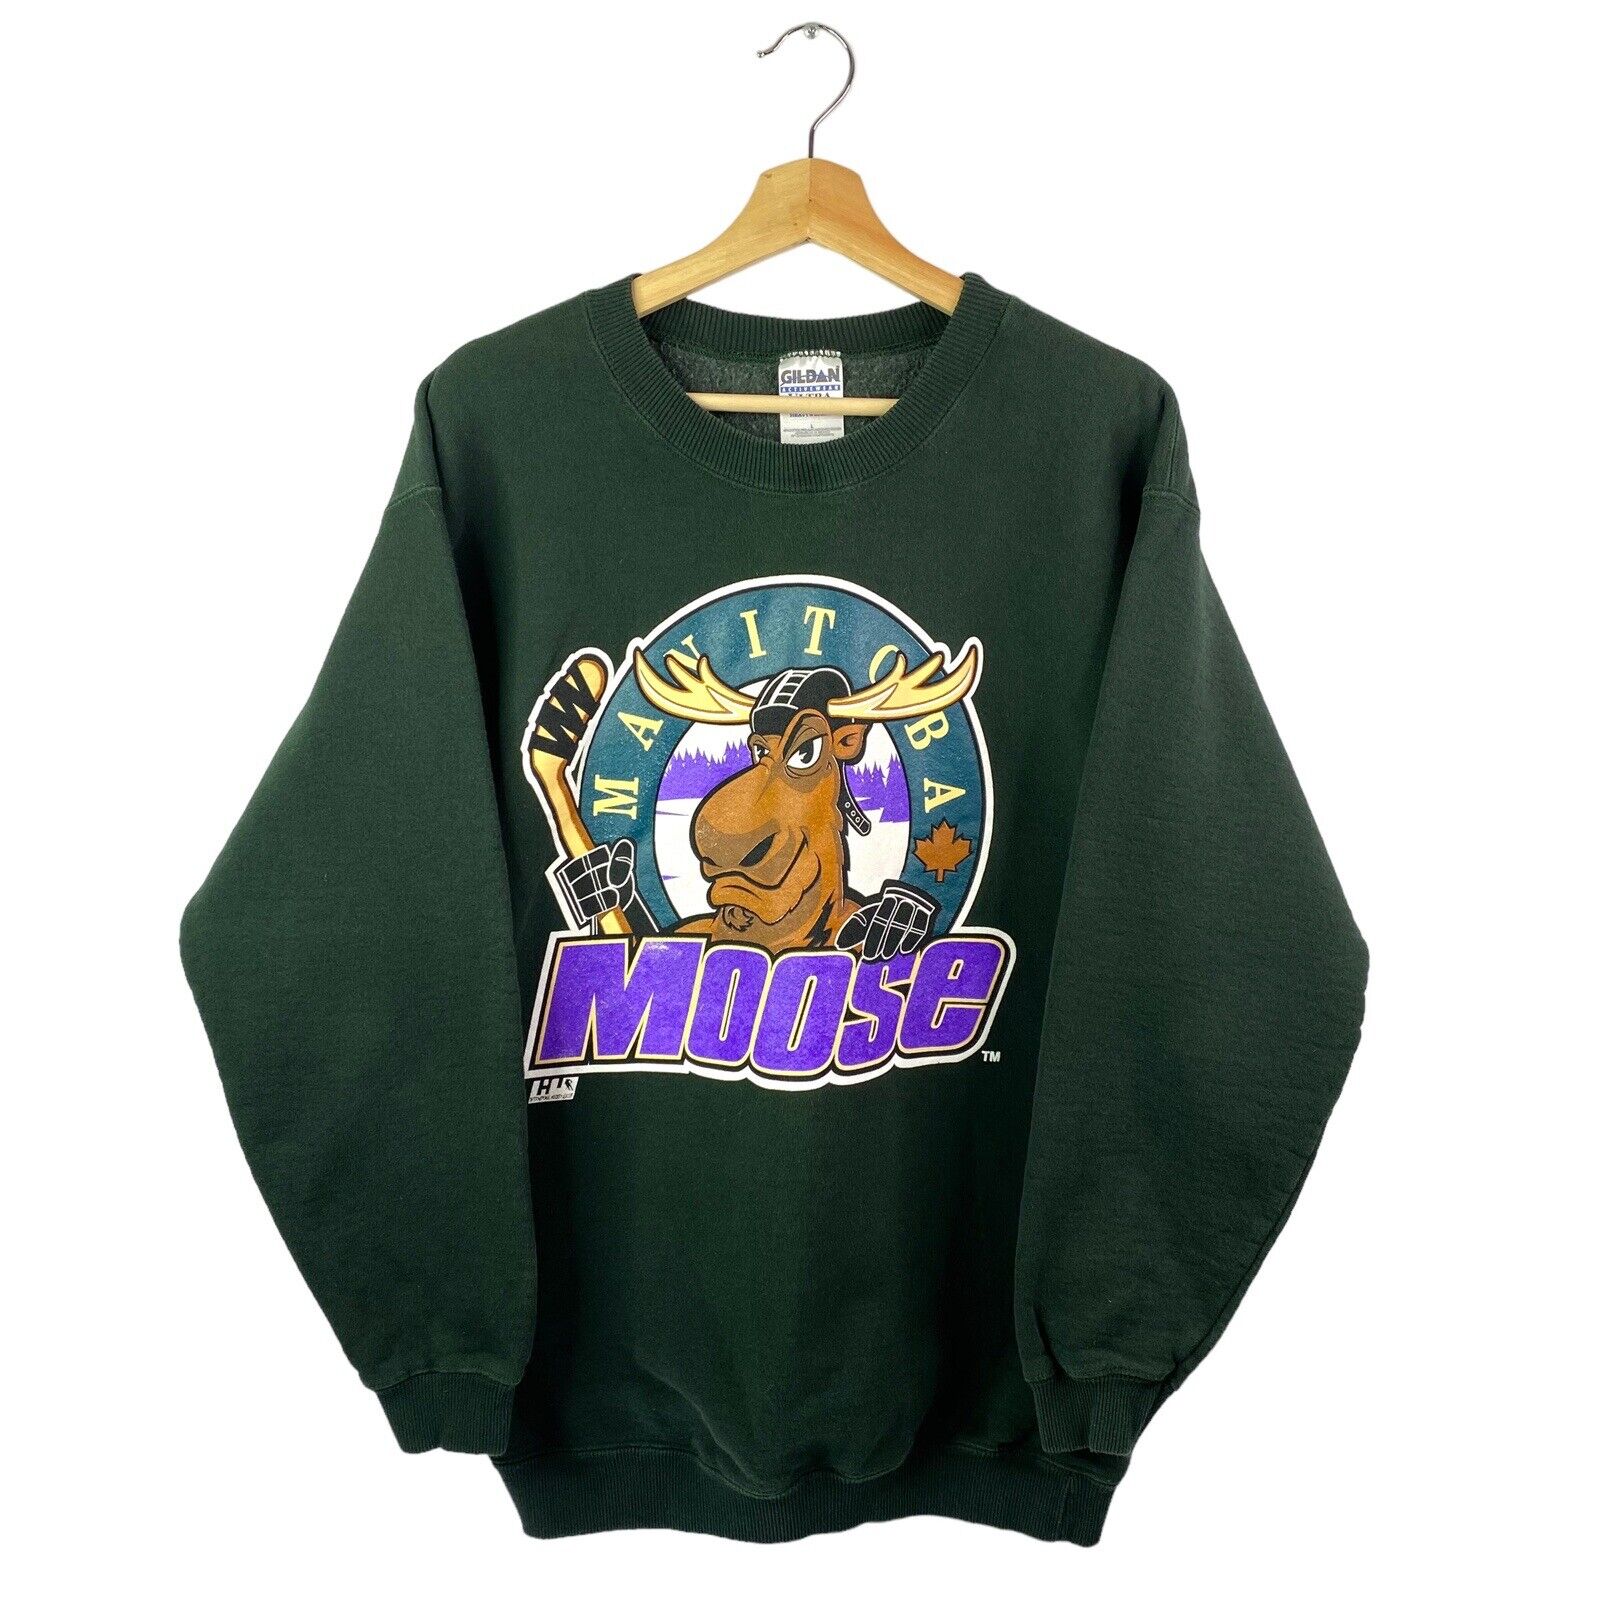 VTG Manitoba Moose Crewneck AHL Hockey Fan 90s Retro Spell Out Mickey Size Large